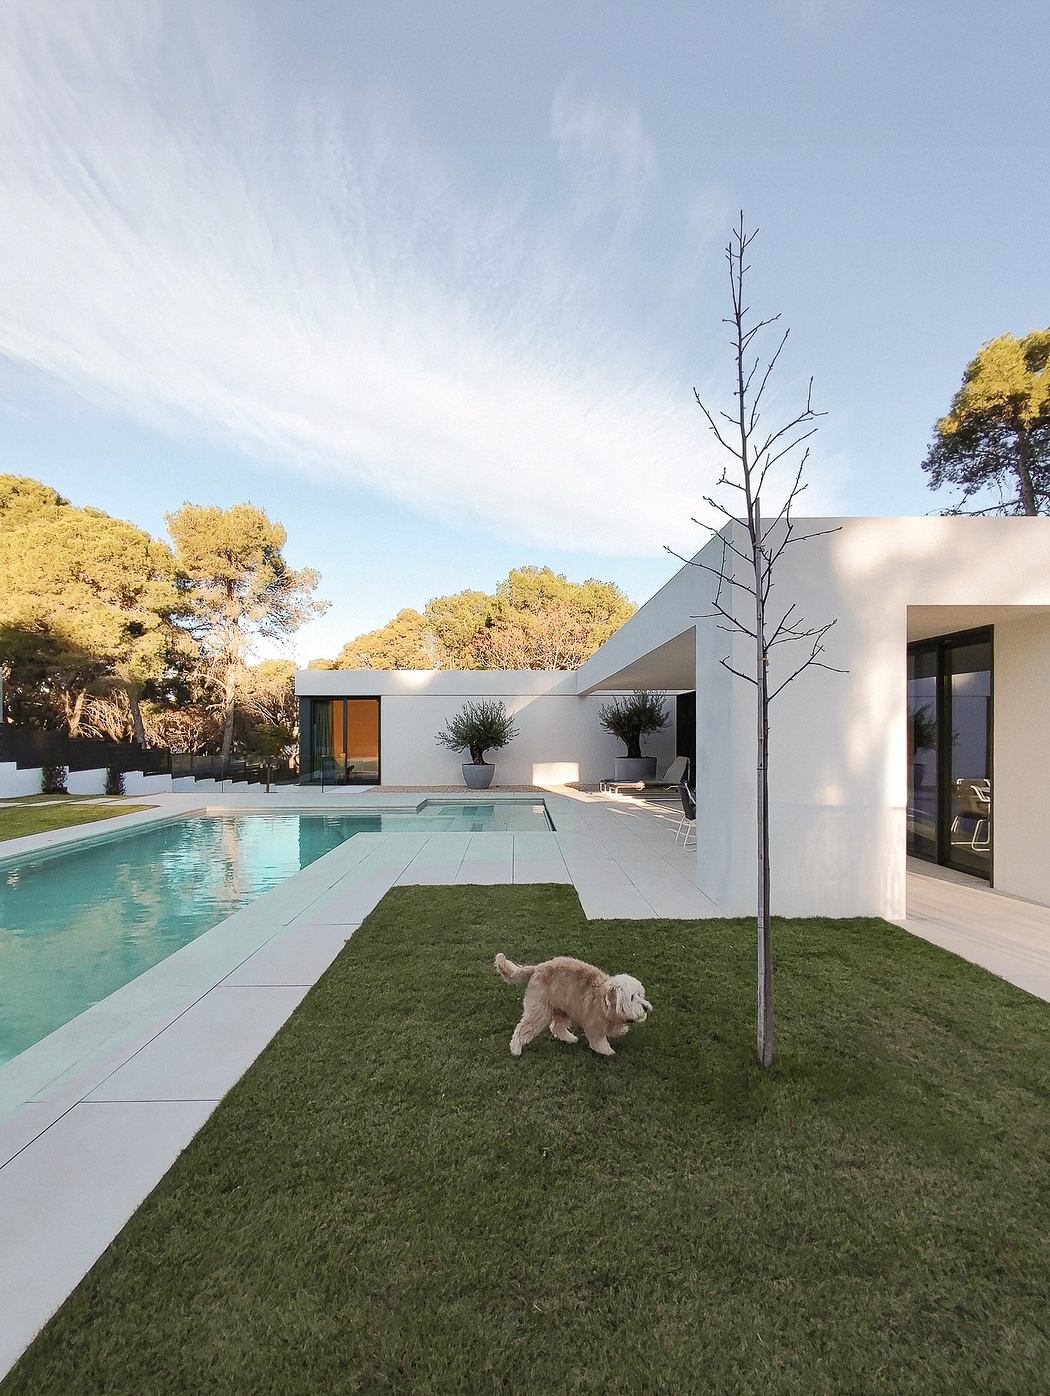 Modern house with pool, lawn, and a dog playing outside.